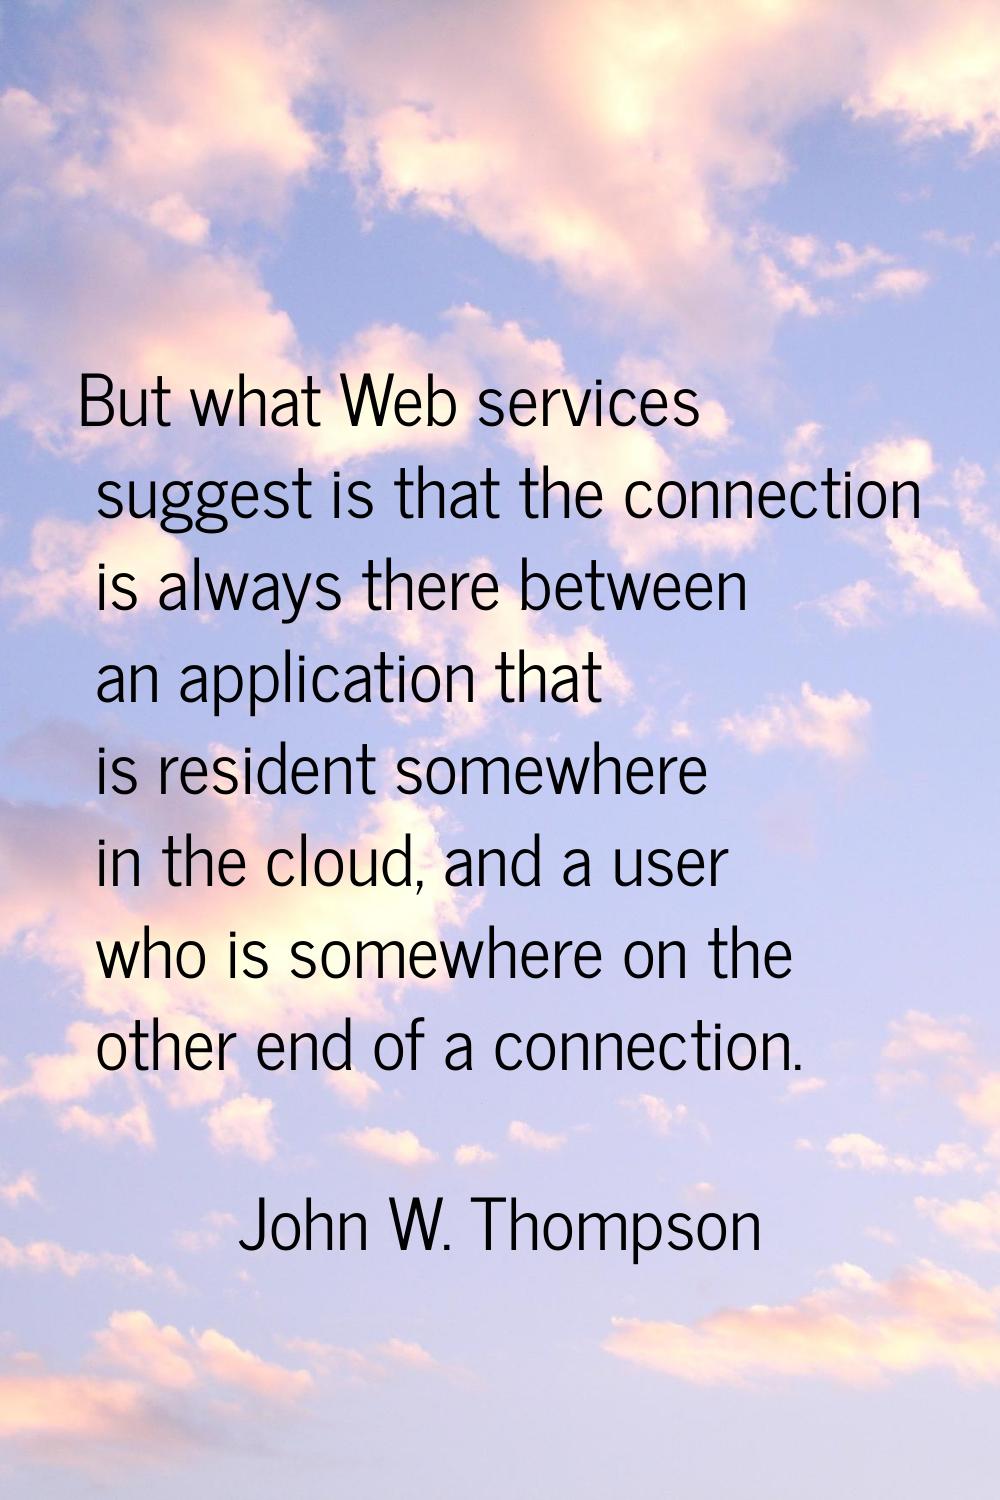 But what Web services suggest is that the connection is always there between an application that is